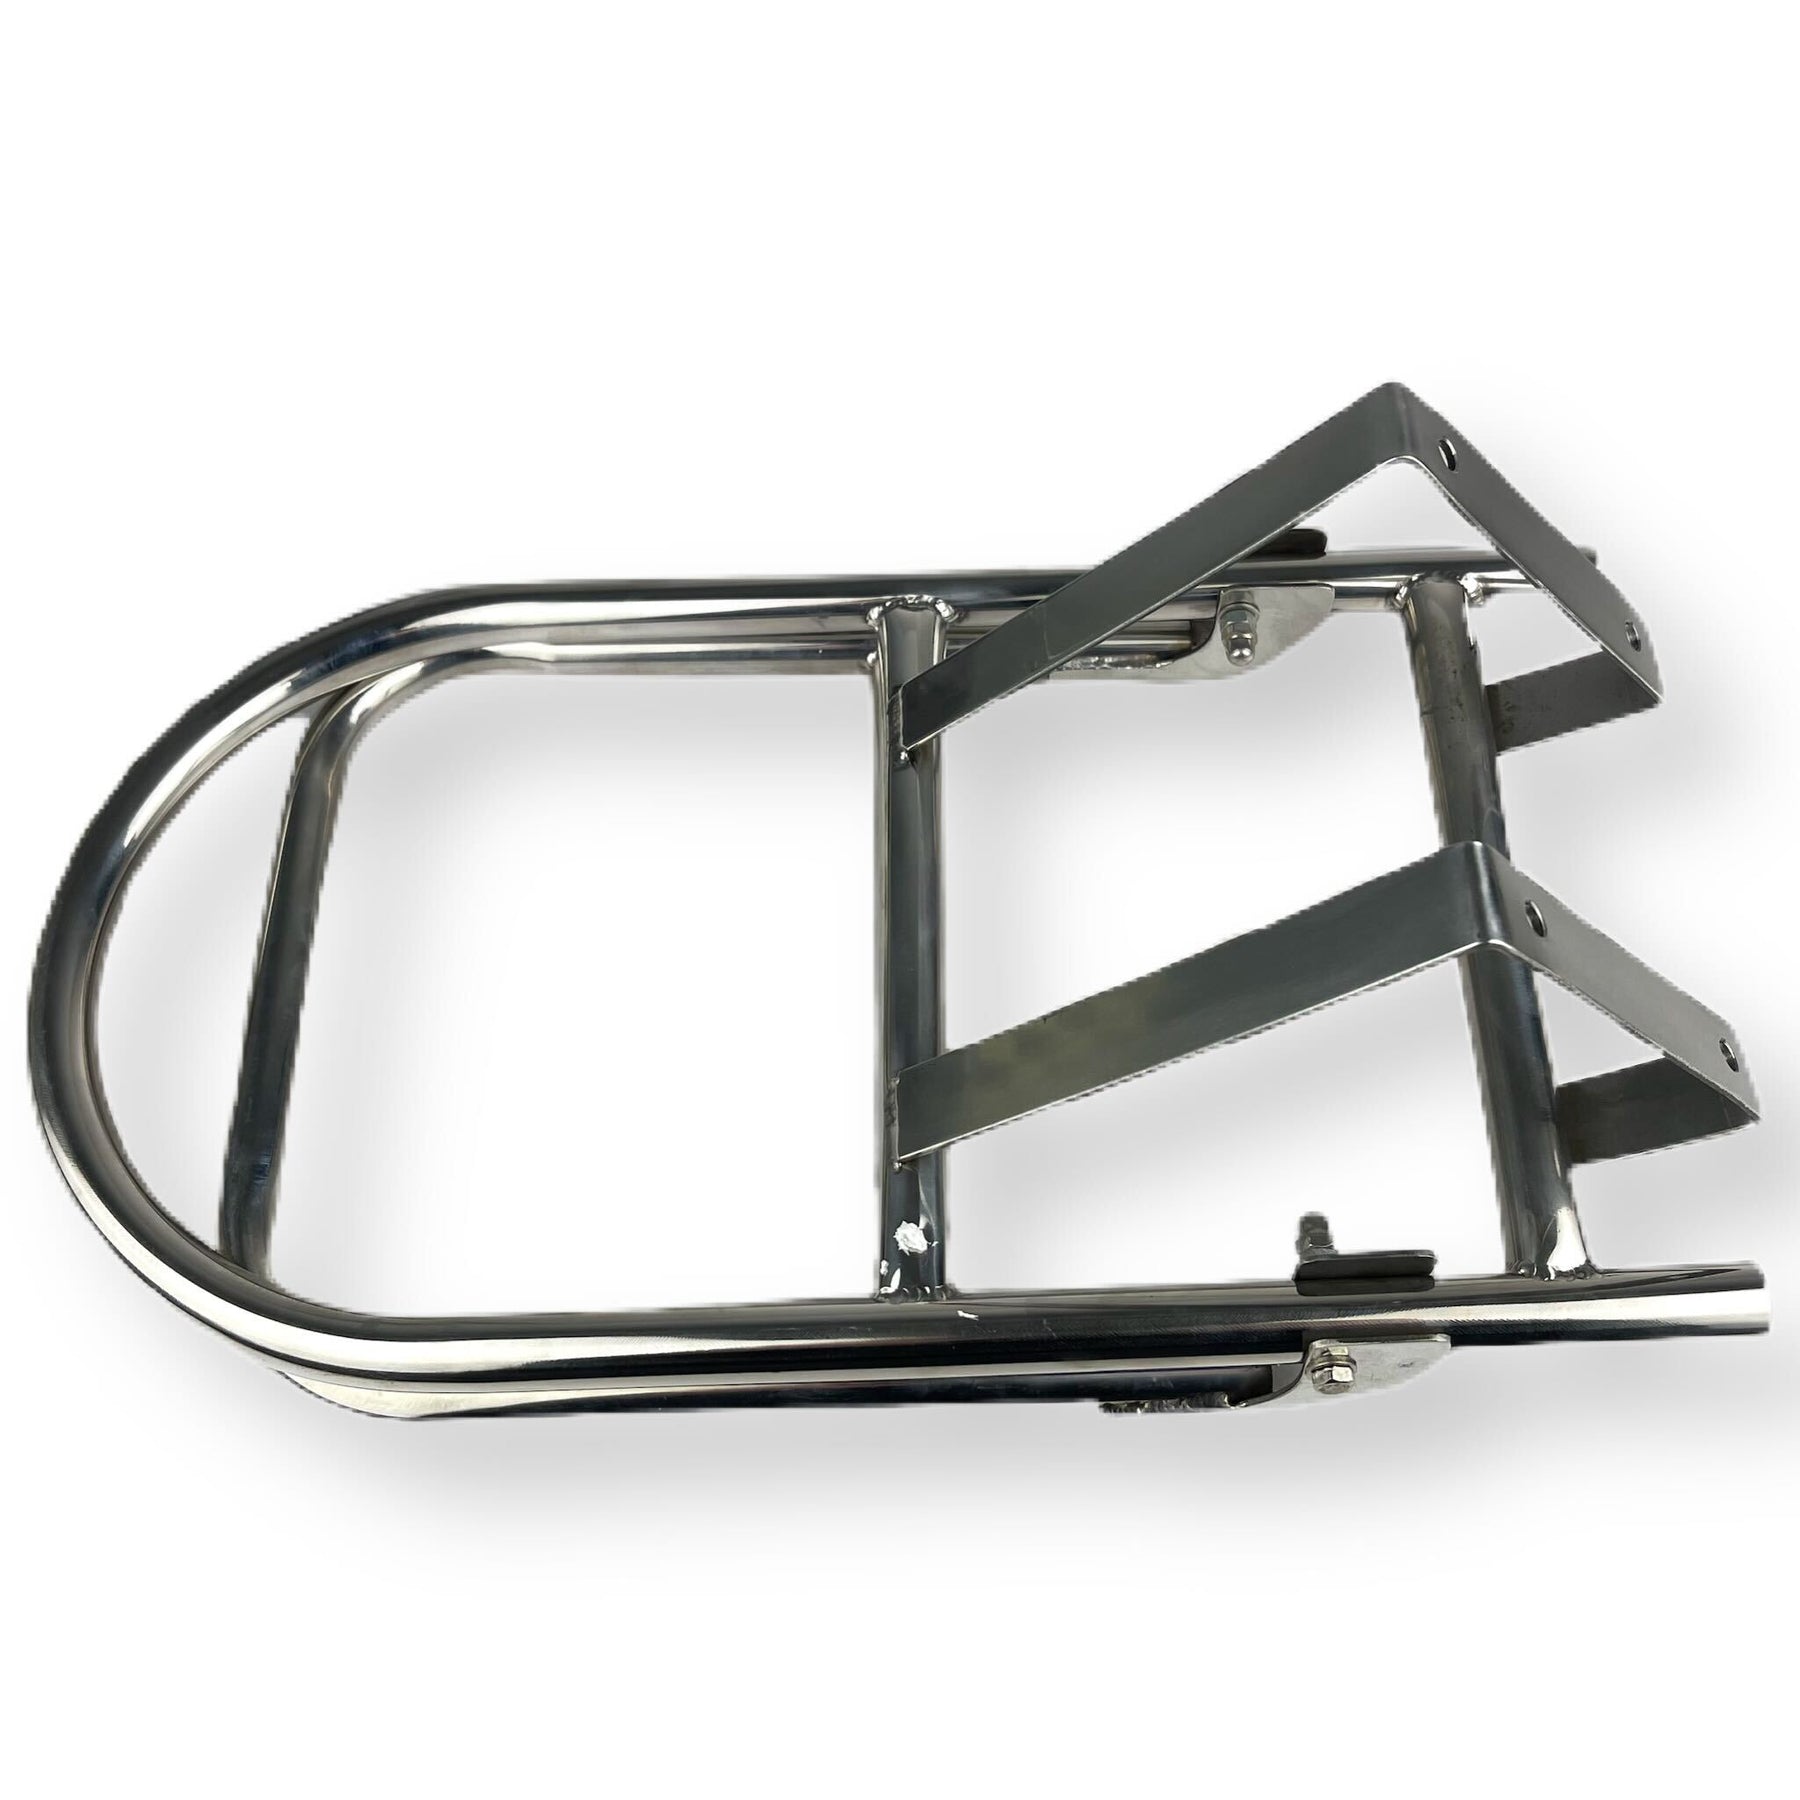 Scomadi Royal Alloy Ulma Nanucci Rear Flip Down Carrier Rack - Polished Stainless Steel